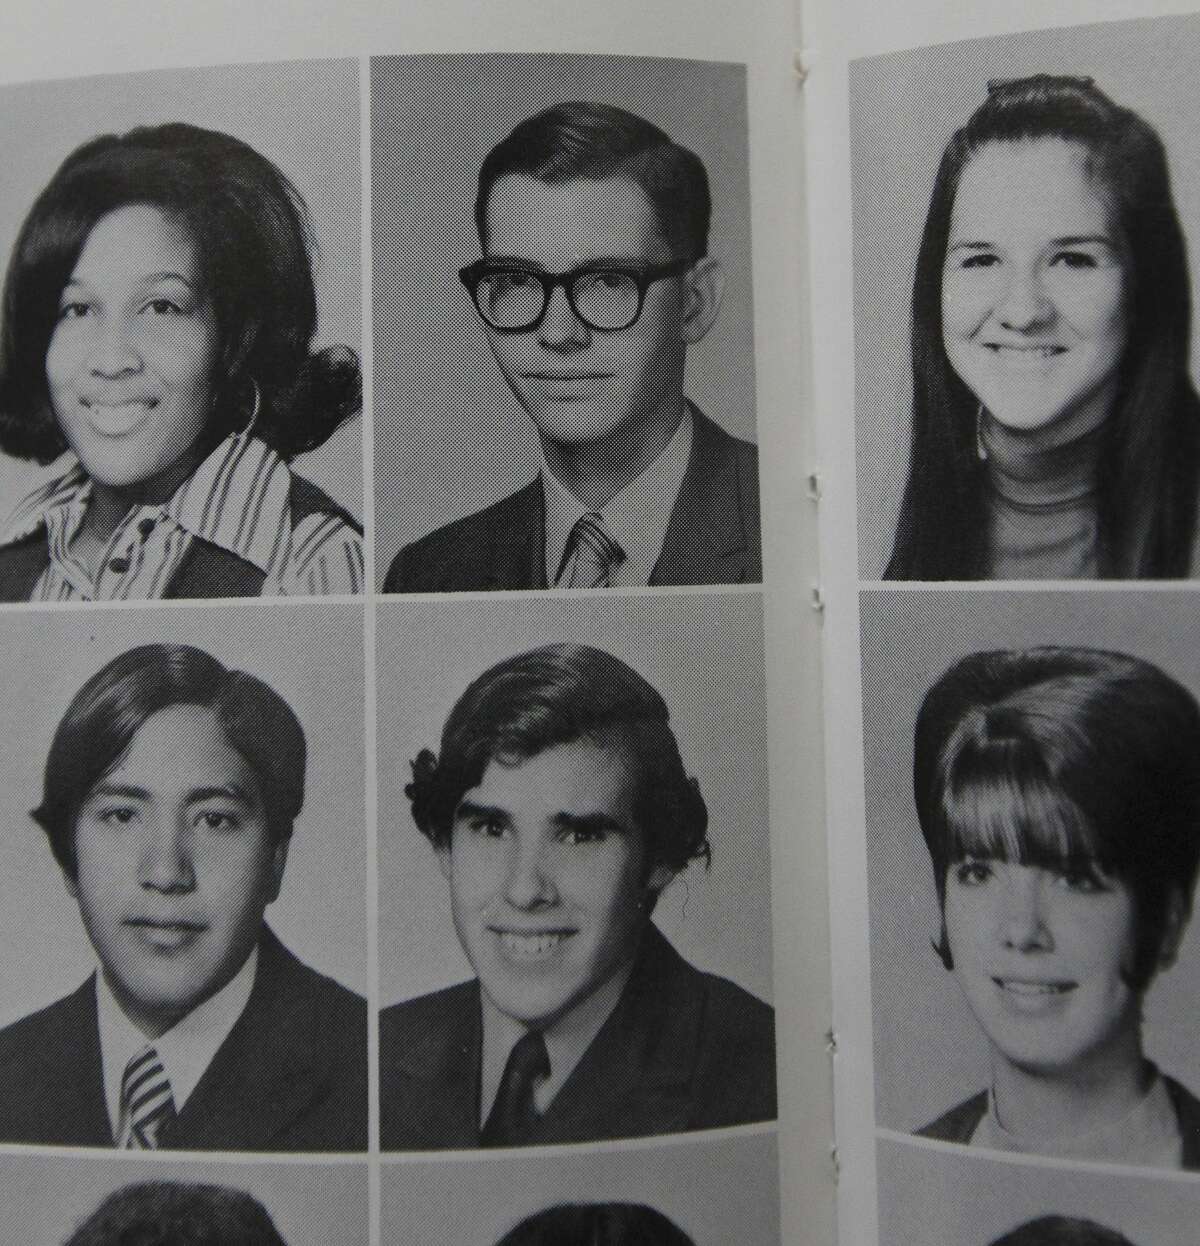 Scores of noteworthy people went to Jefferson High School. That includes William Moerner (top center), who is shown as a senior in the 1971 school yearbook. Moerner was award the 2014 Nobel Prize in chemistry.